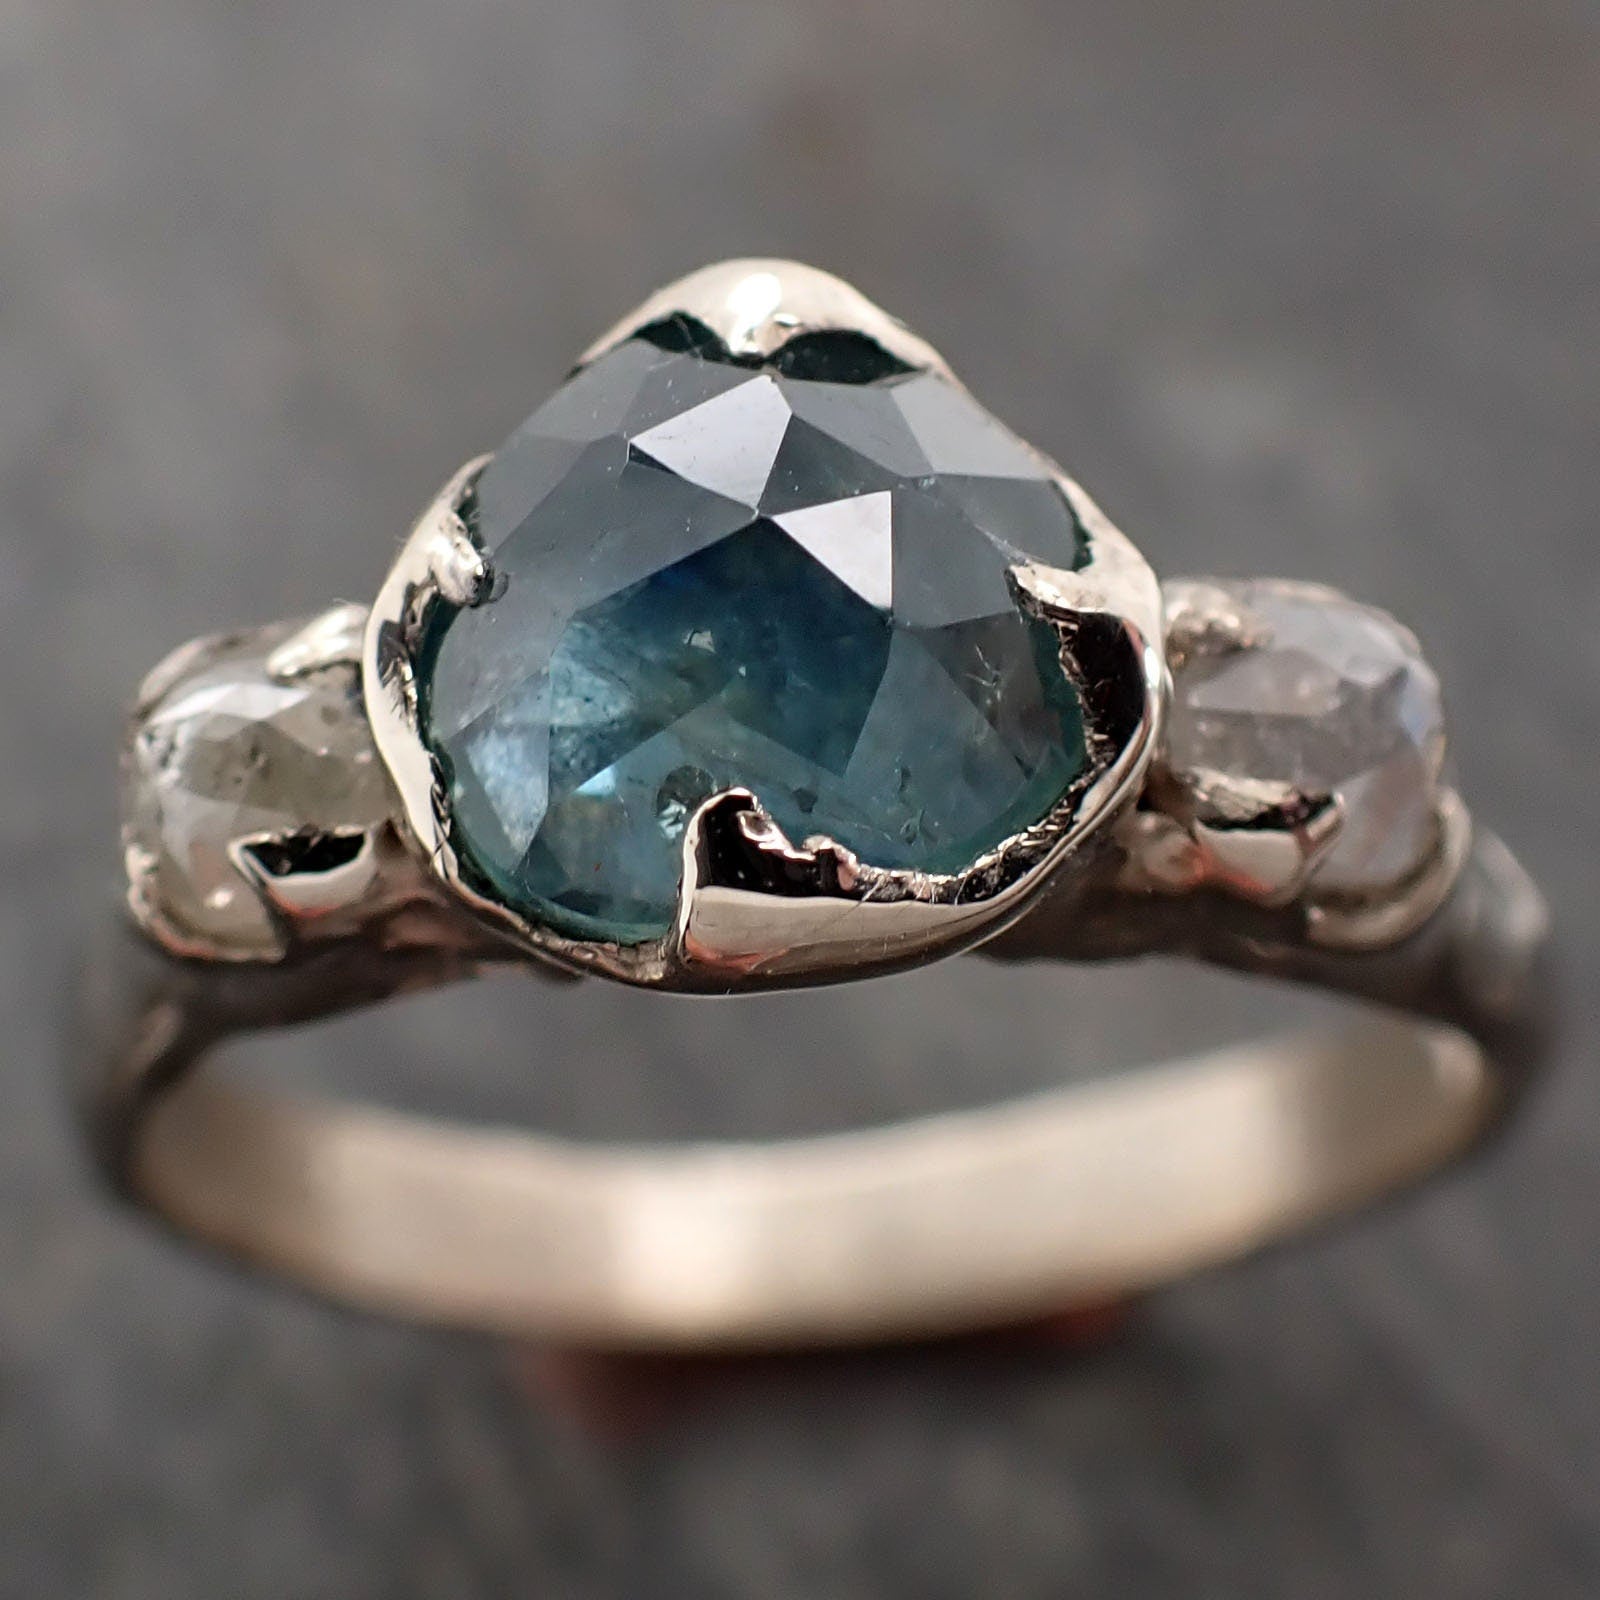 Partially faceted blue Montana Sapphire and fancy Diamonds 18k White Gold Engagement Wedding Ring Gemstone Ring Multi stone Ring 2998